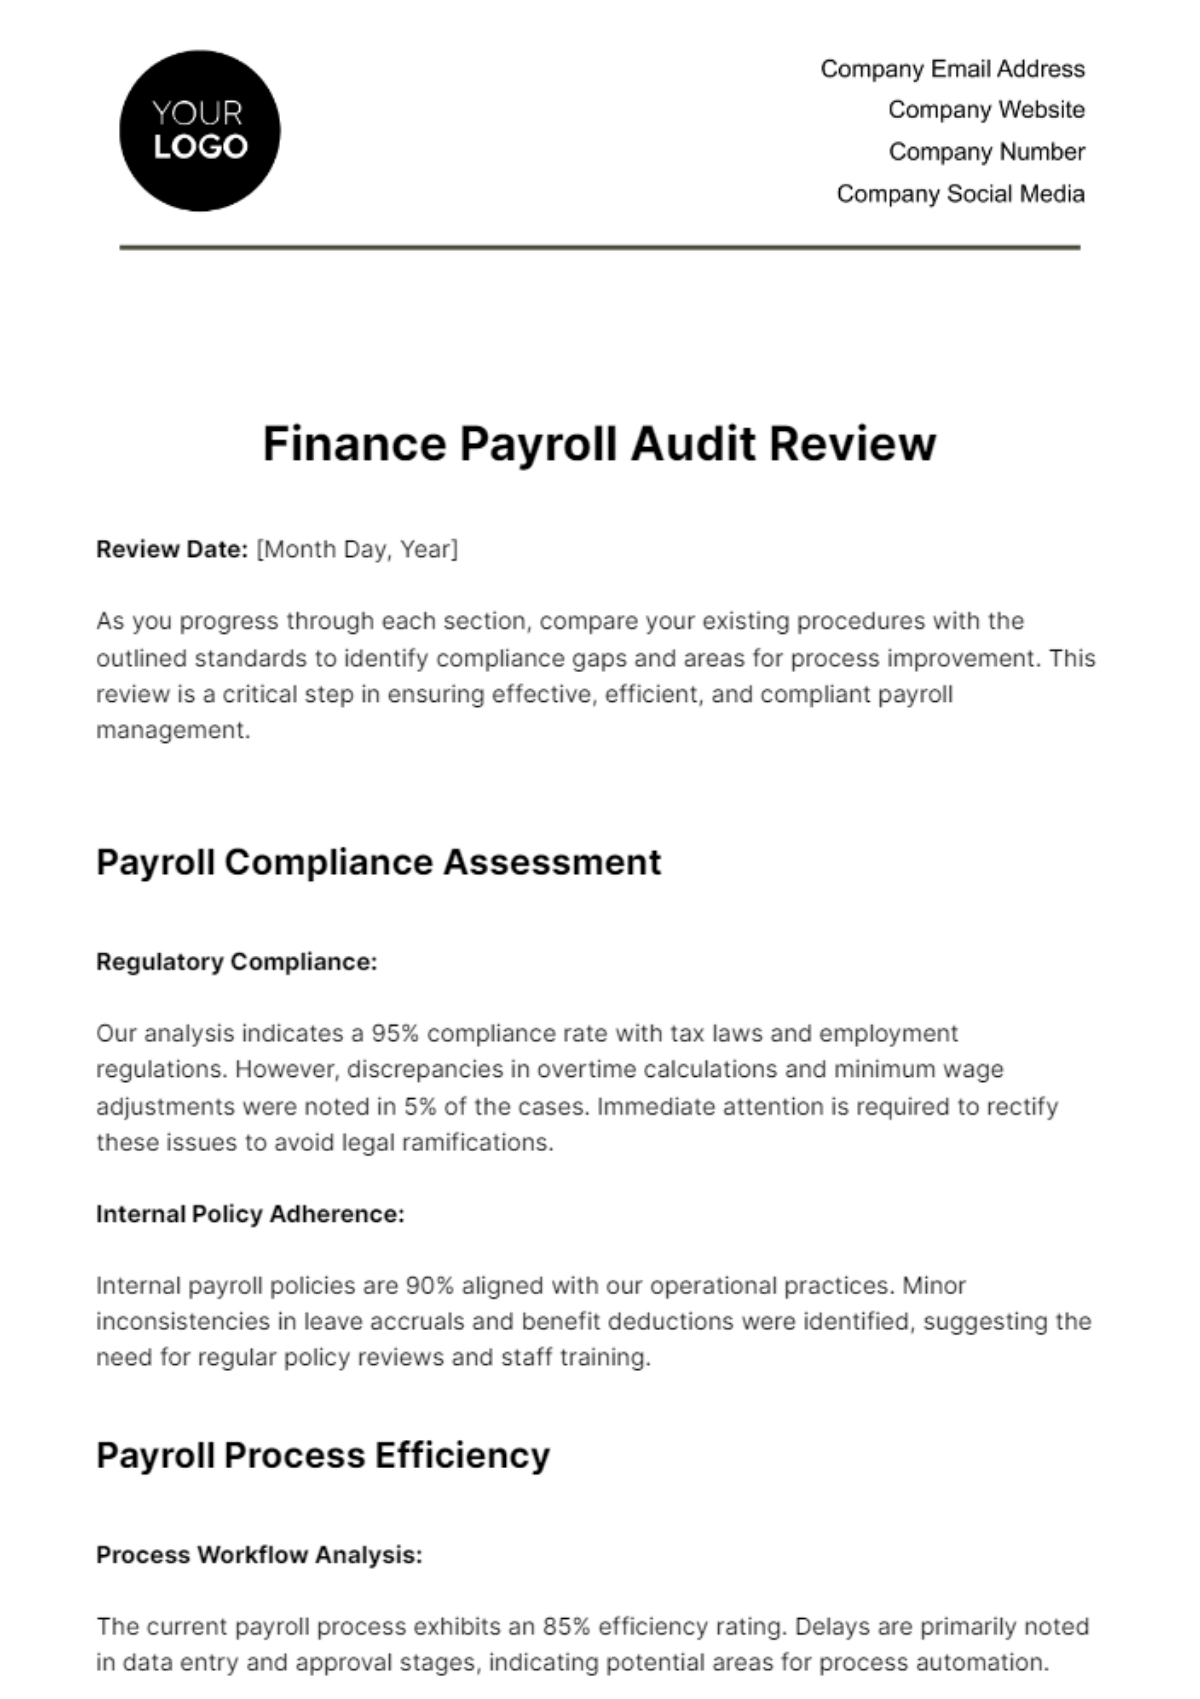 Free Finance Payroll Audit Review Template